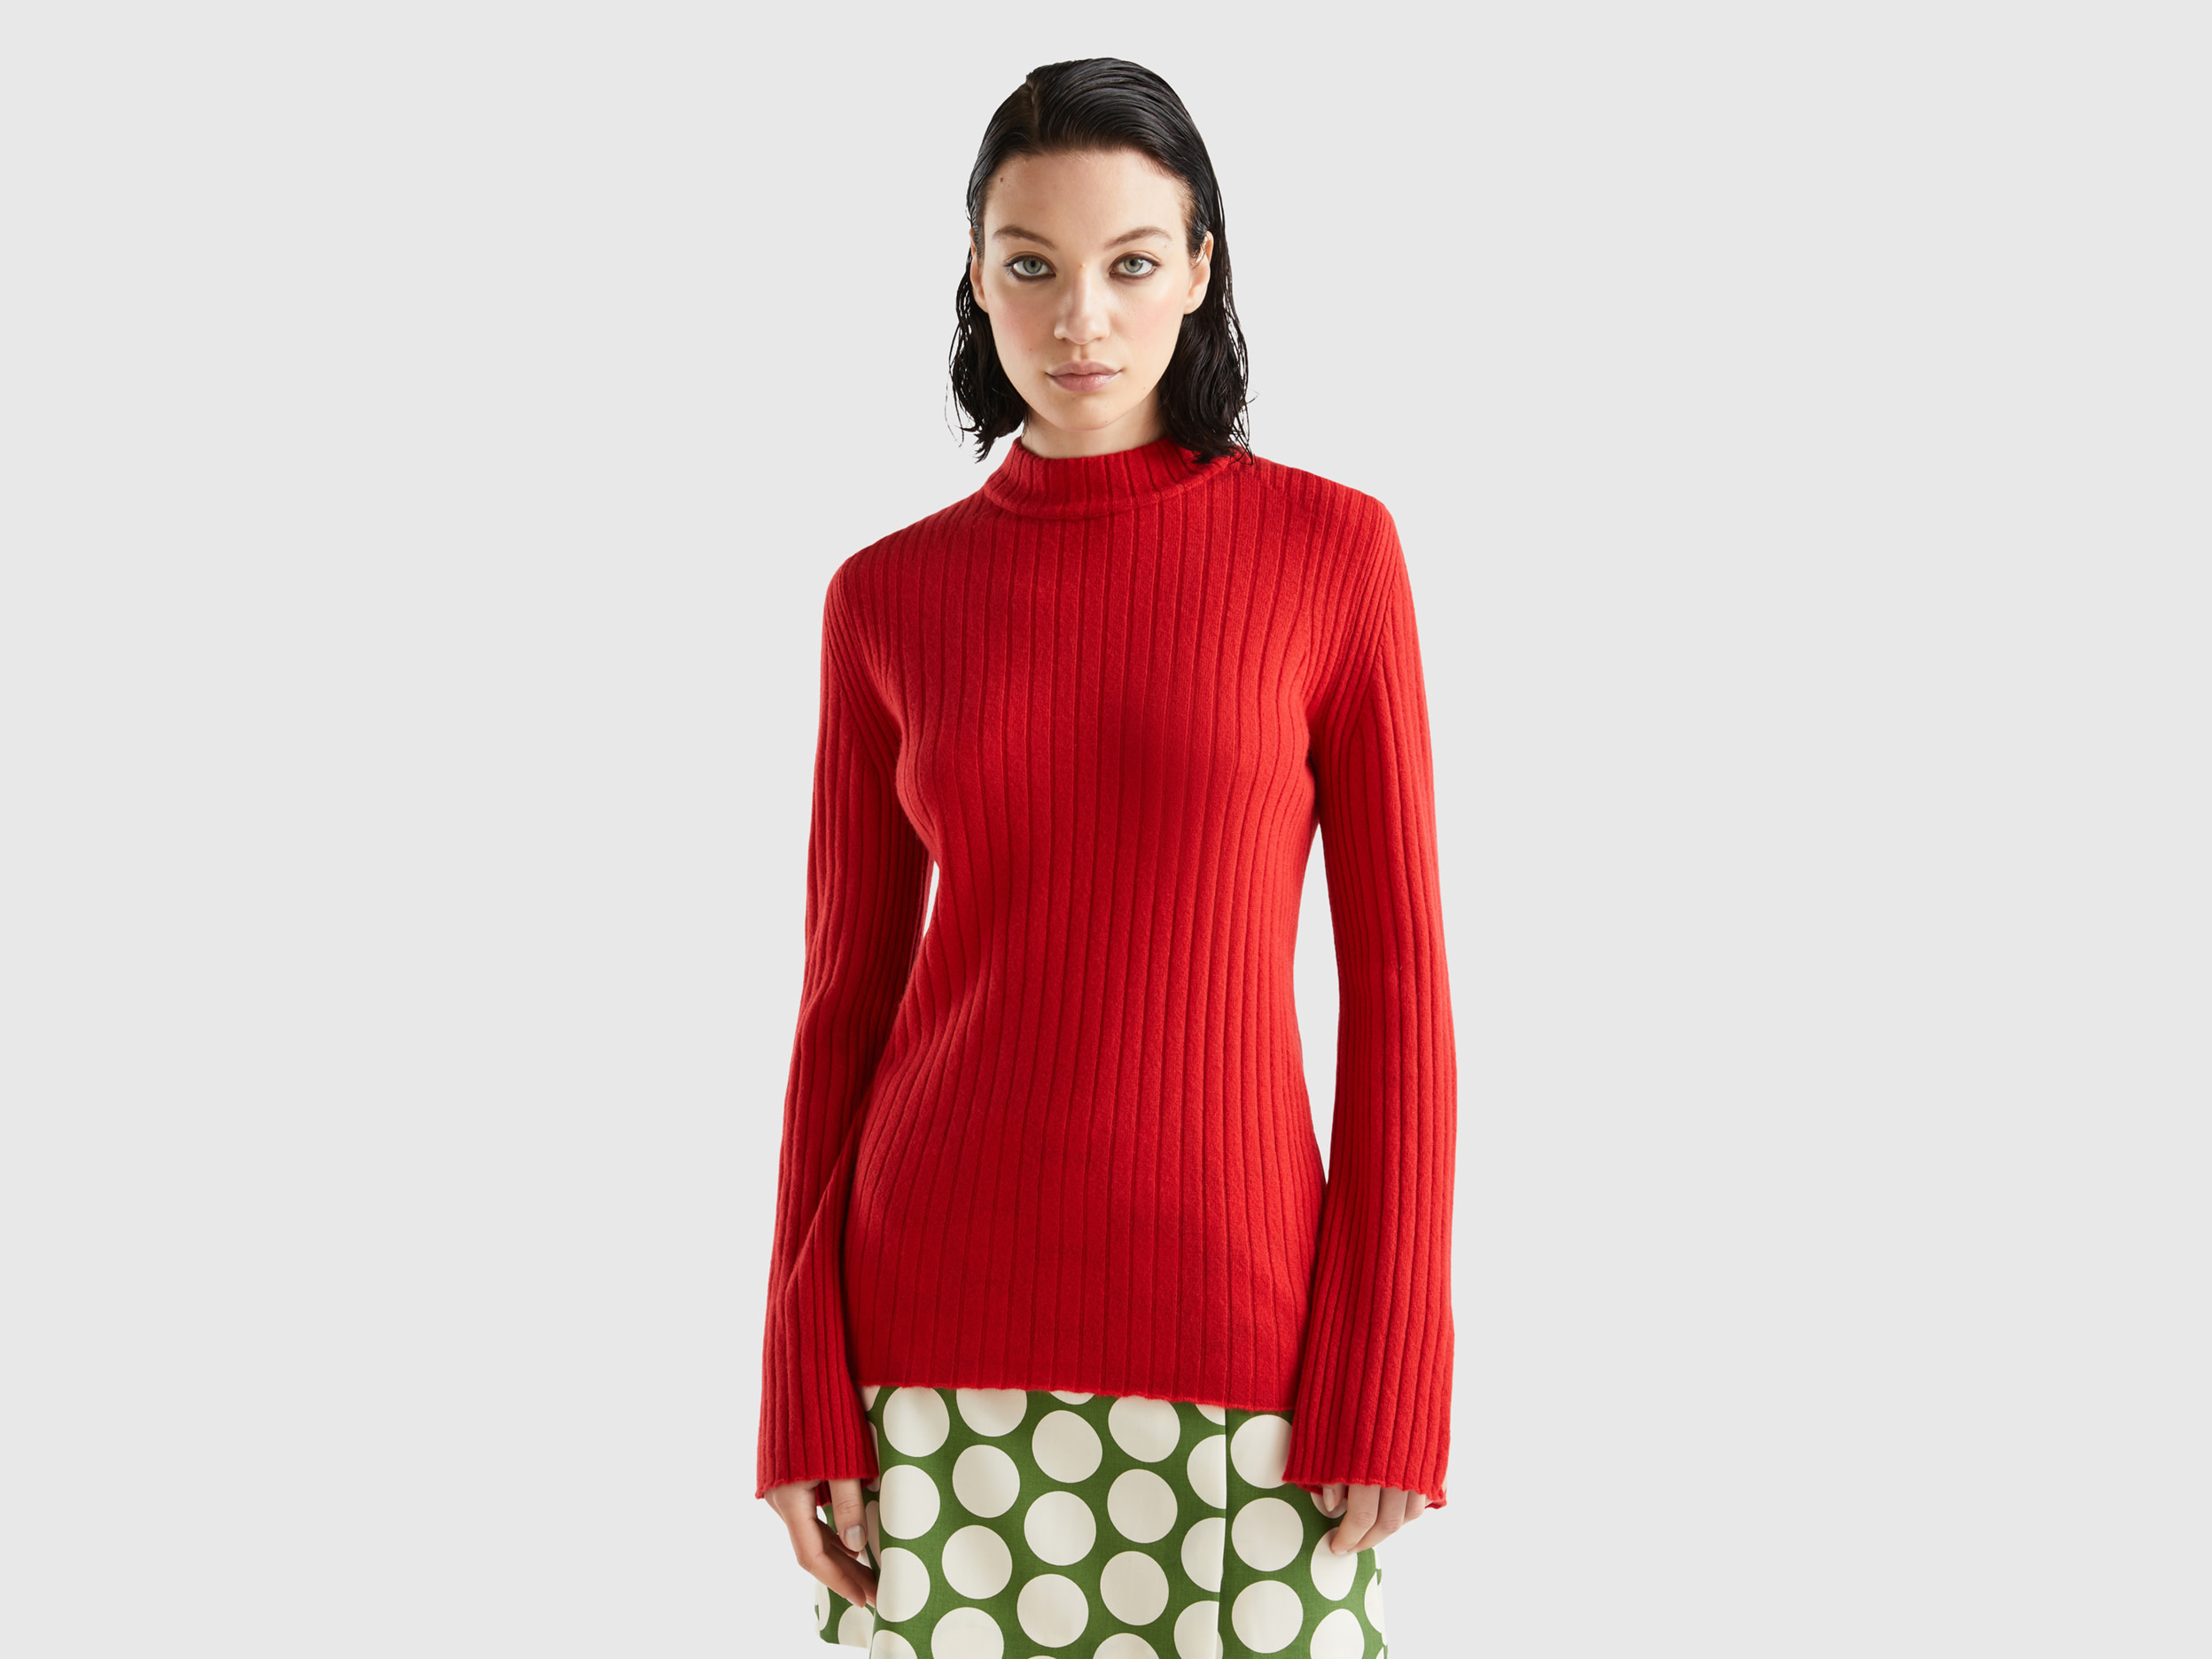 Benetton, Turtleneck Sweater With Slits, size L, Red, Women